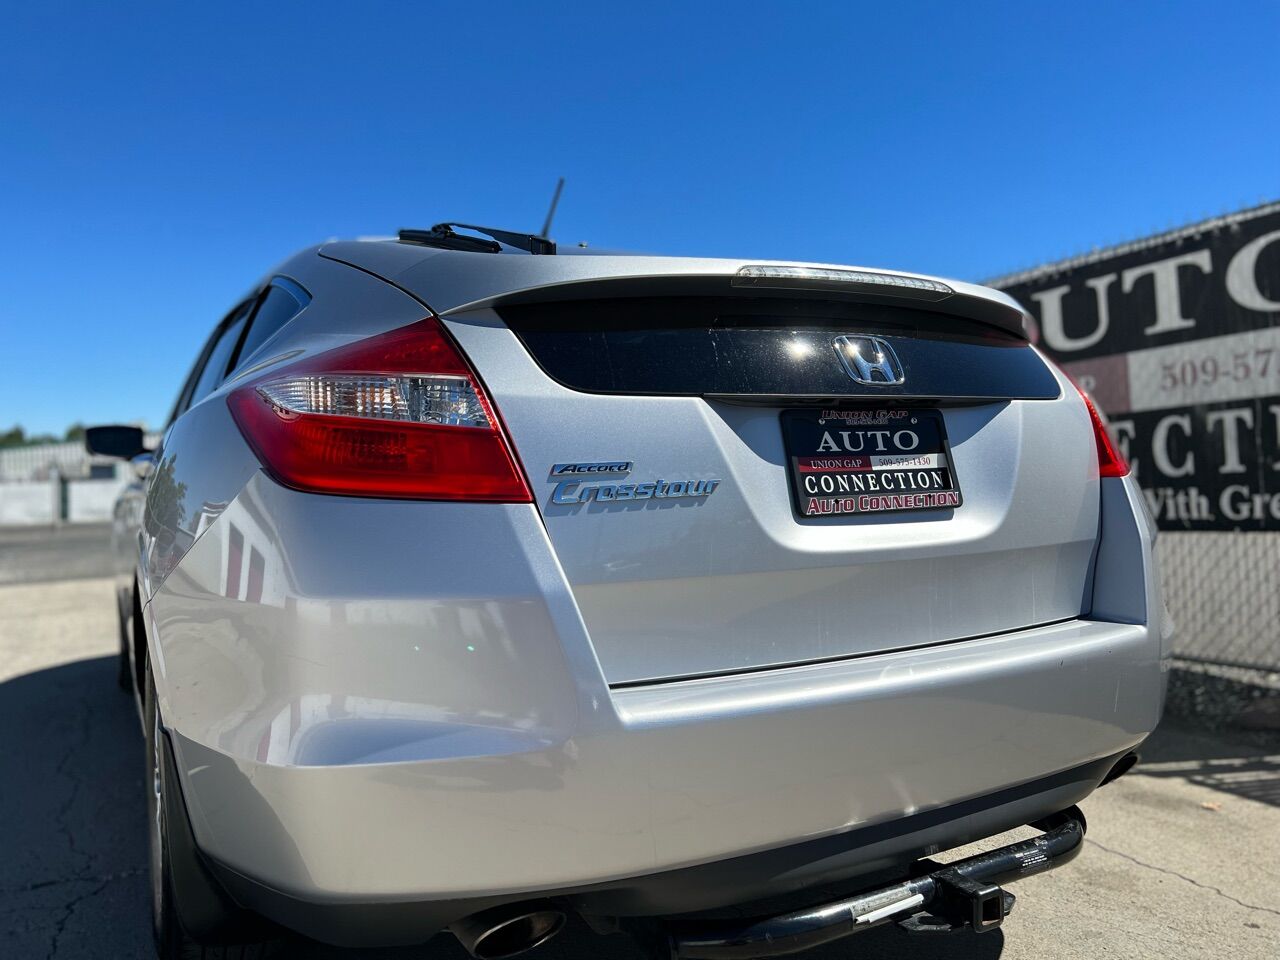 Preowned 2010 HONDA Accord Crosstour EX 4dr Crossover for sale by Auto Connection in Union Gap, WA